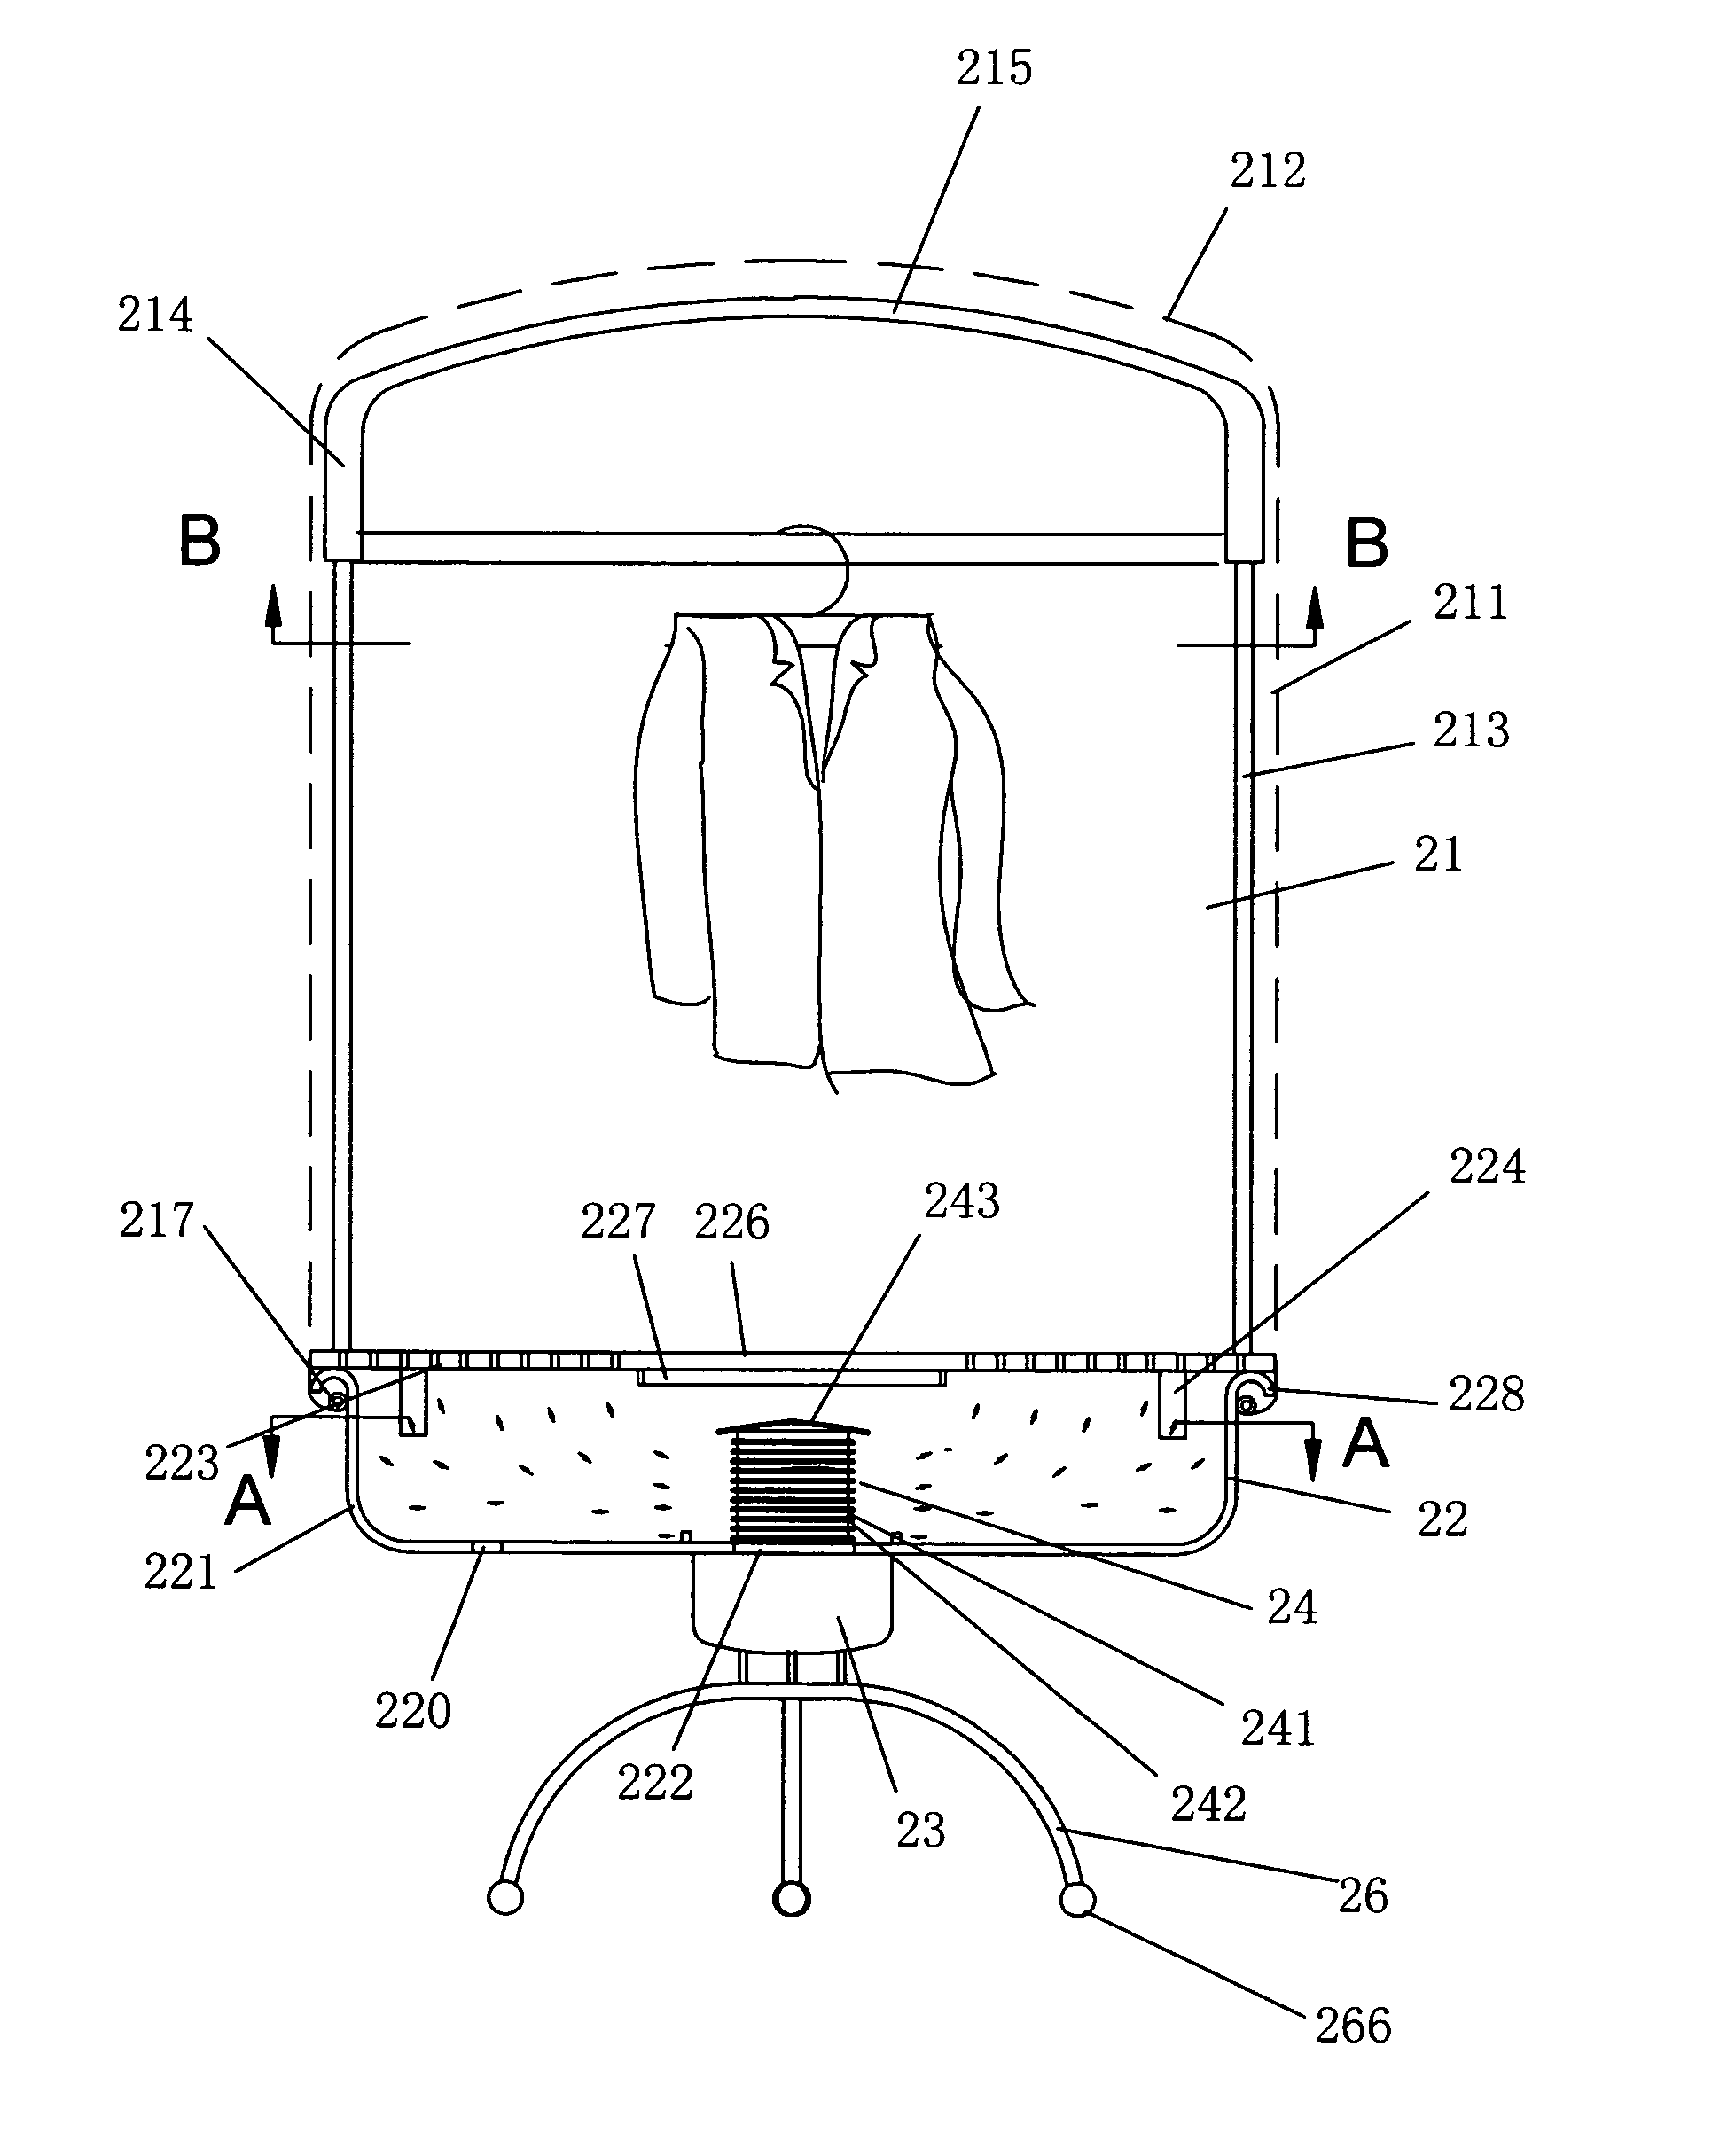 Safe clothes drying machine with a large space structure